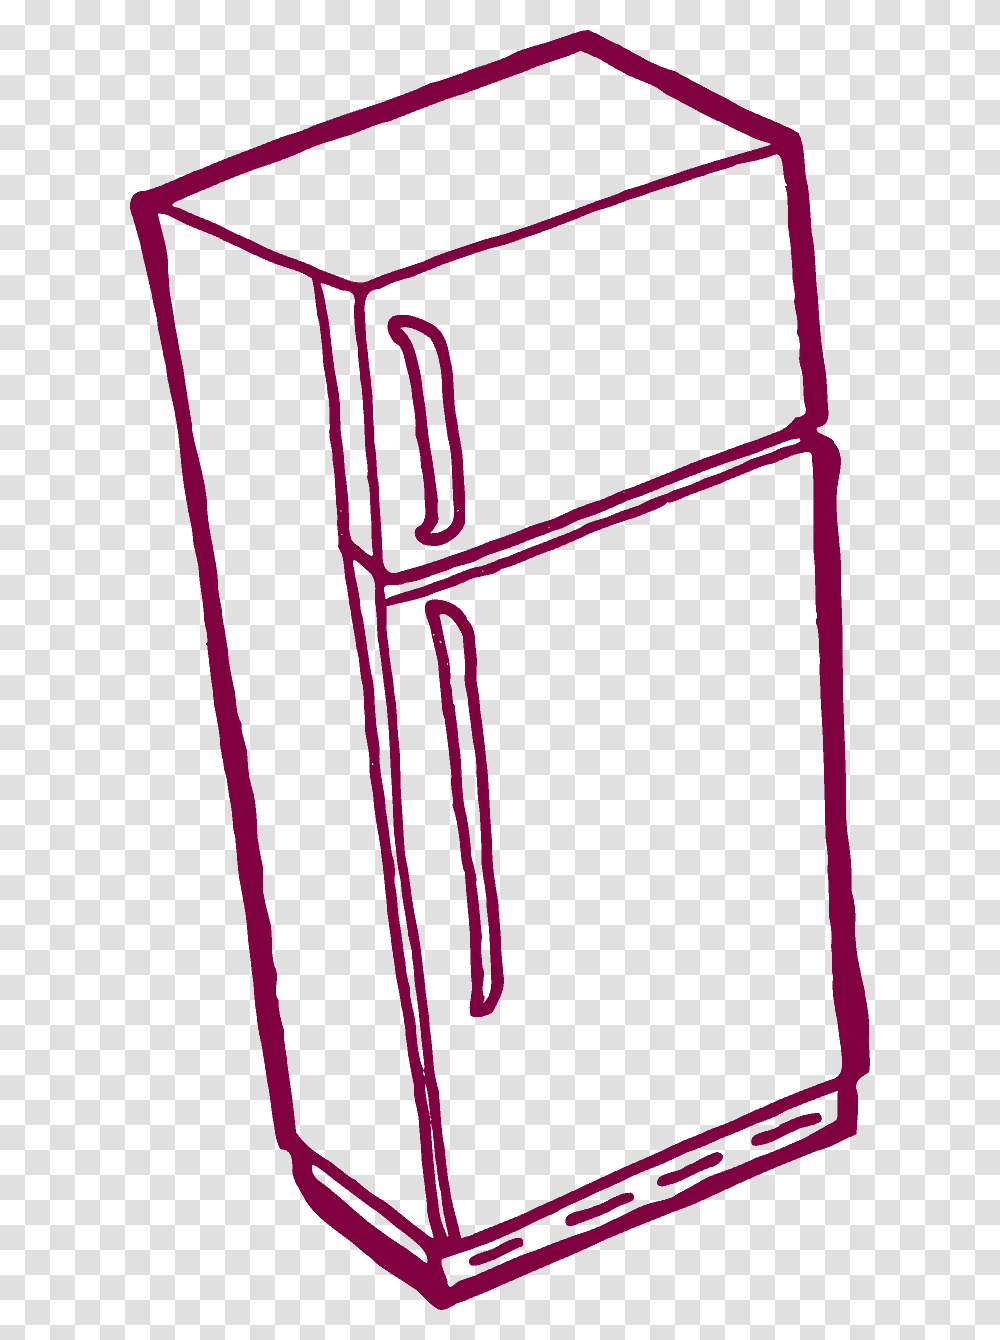 What Happens When We Lay A Refrigerator Down, Diary, Maroon Transparent Png